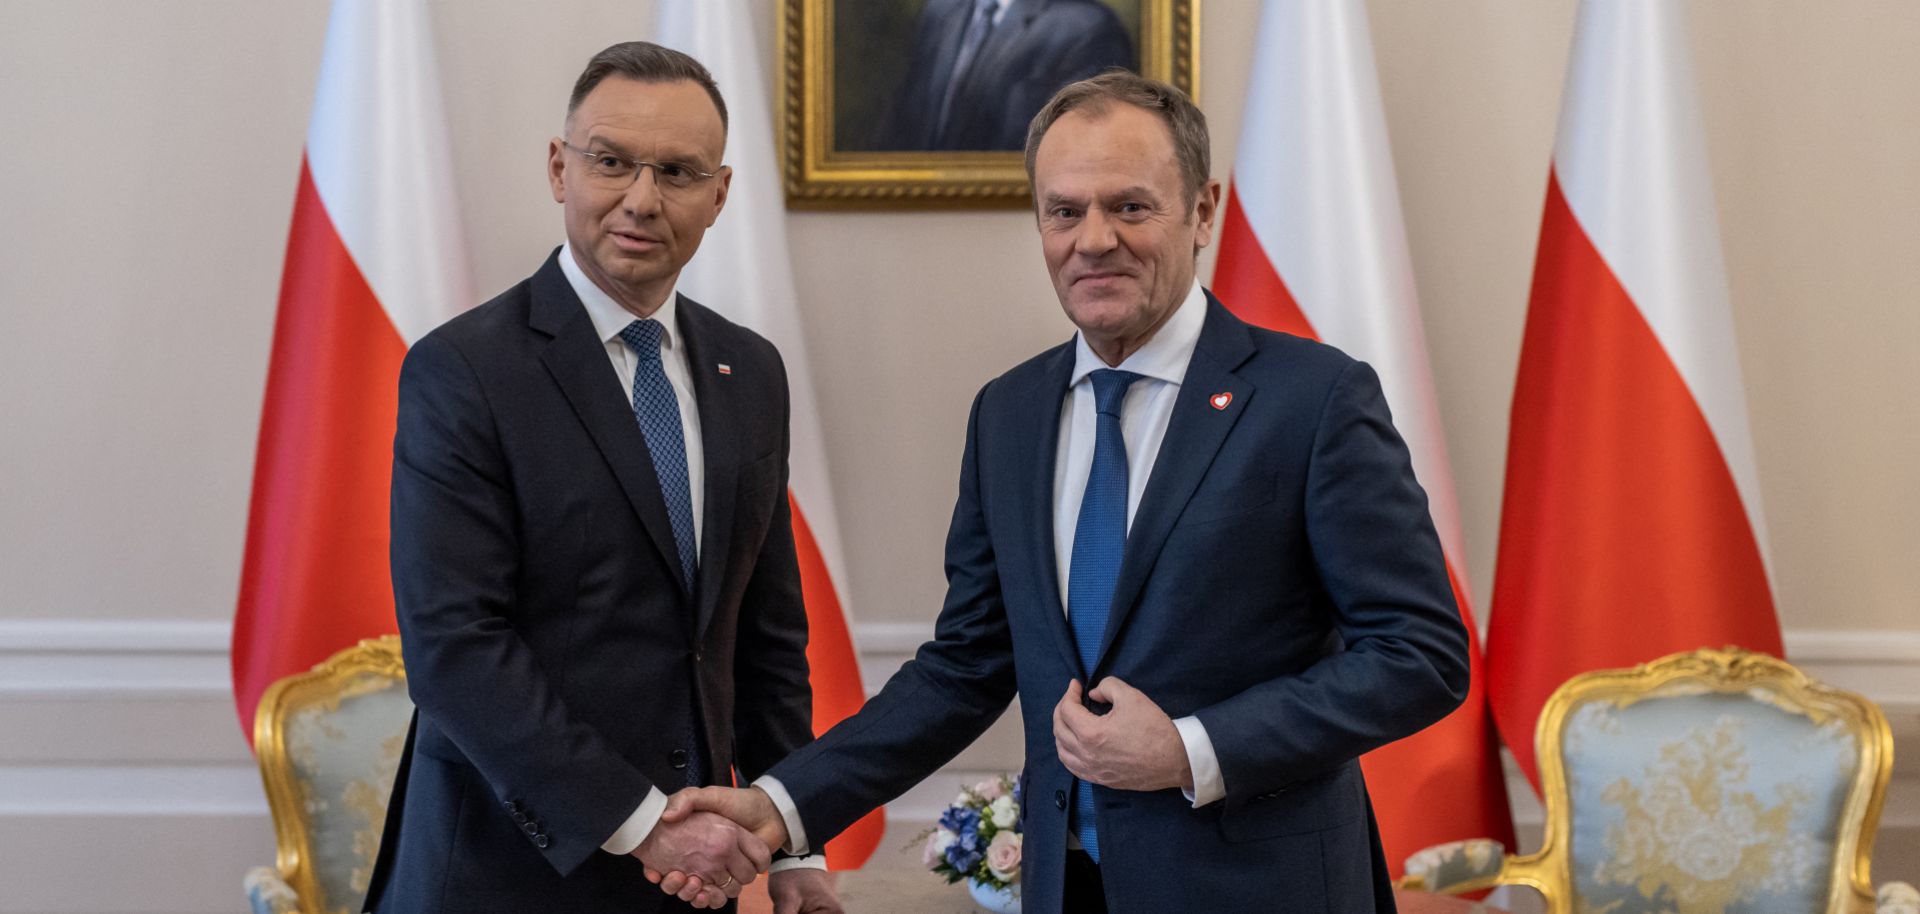 Polish President Andrzej Duda (left) and Polish Prime Minister Donald Tusk (right) shake hands during their meeting at the Presidential Palace in Warsaw, Poland, on Jan. 15, 2024. 